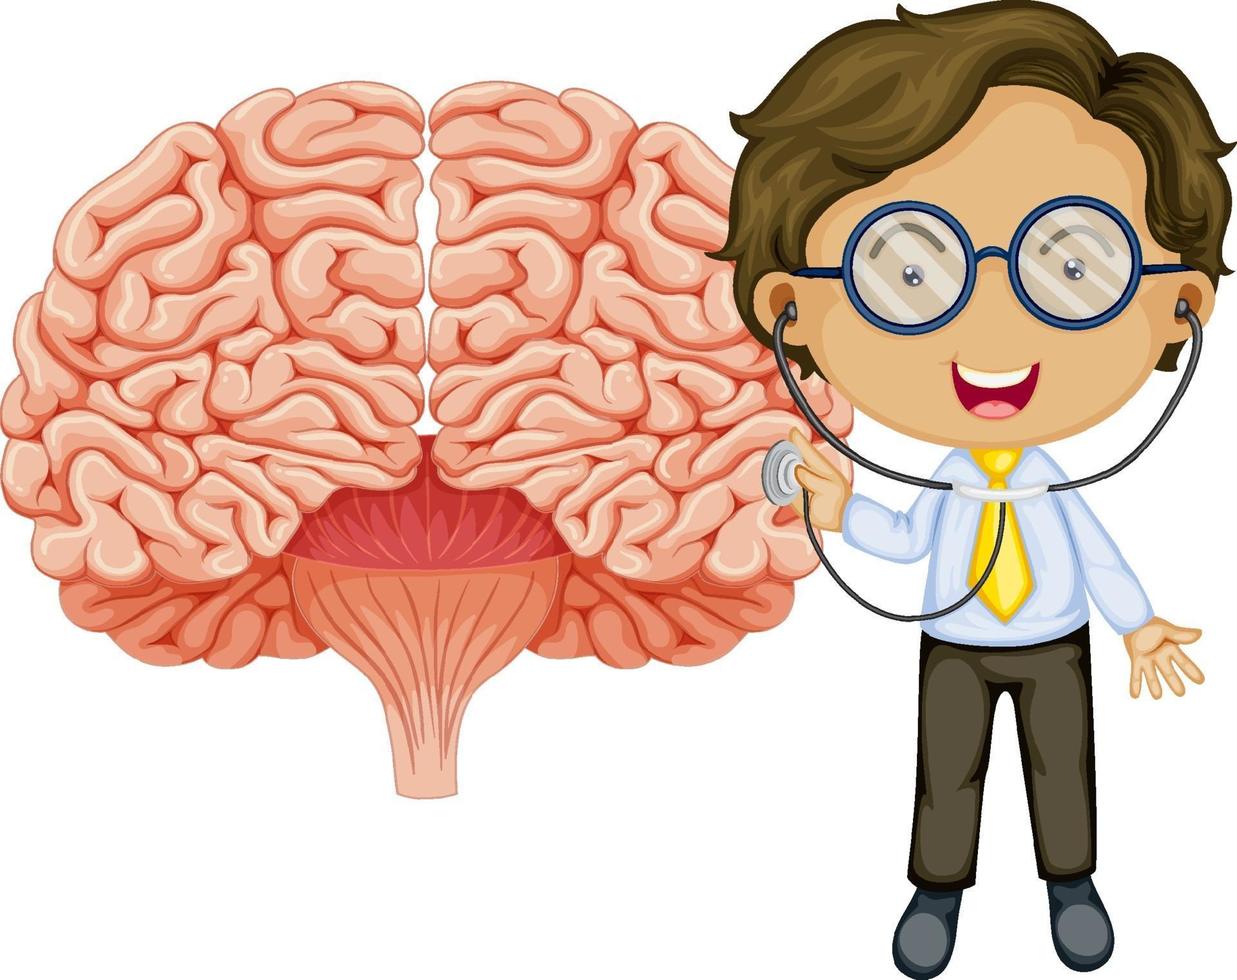 Big brain with a doctor cartoon character vector